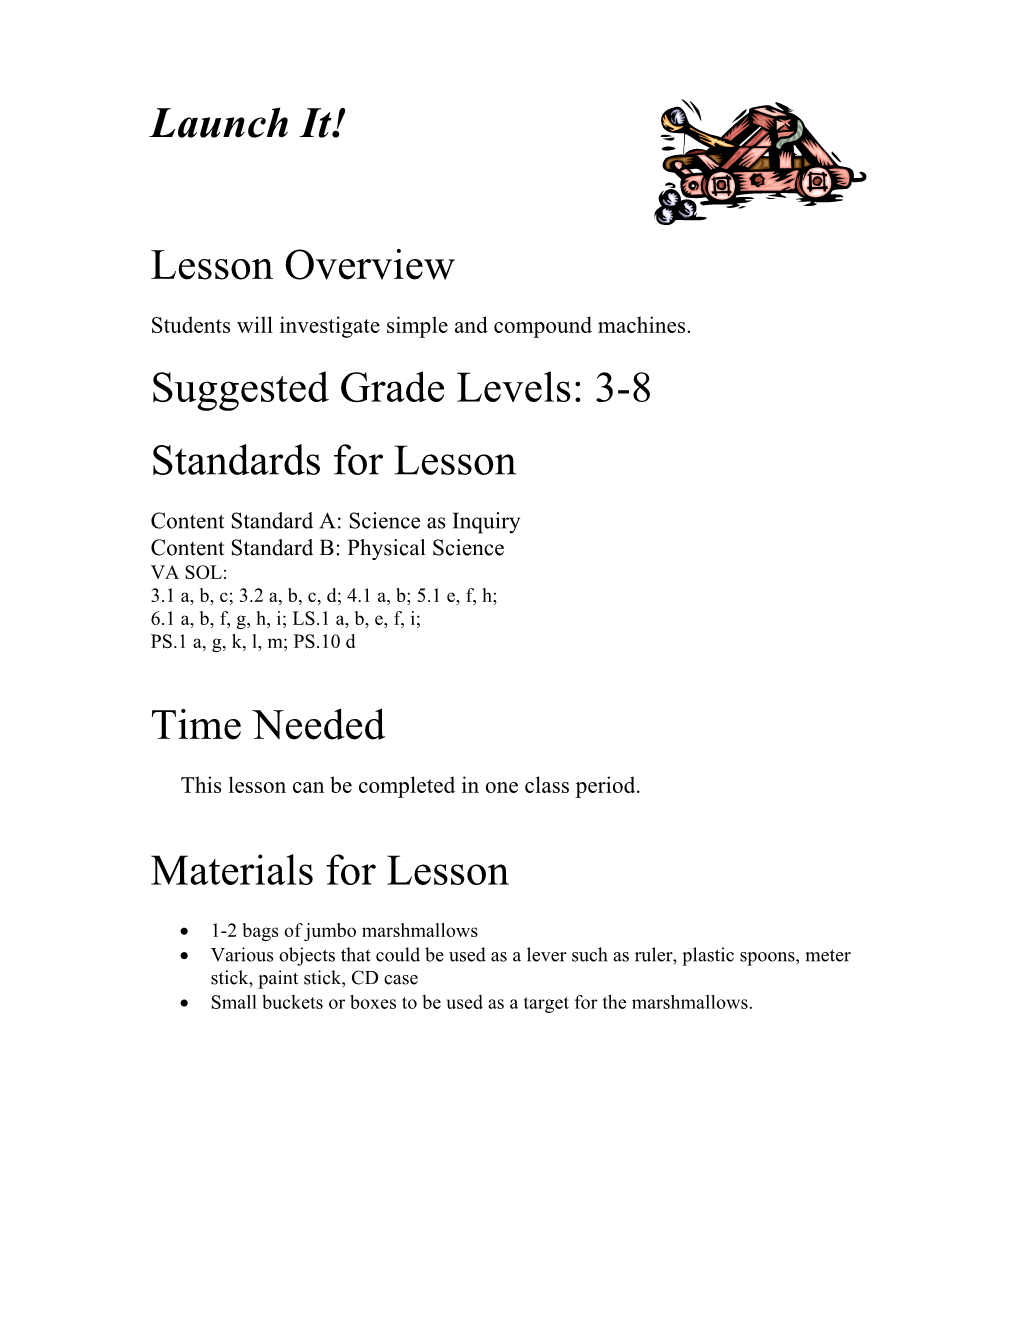 Launch It! Lesson Overview Suggested Grade Levels